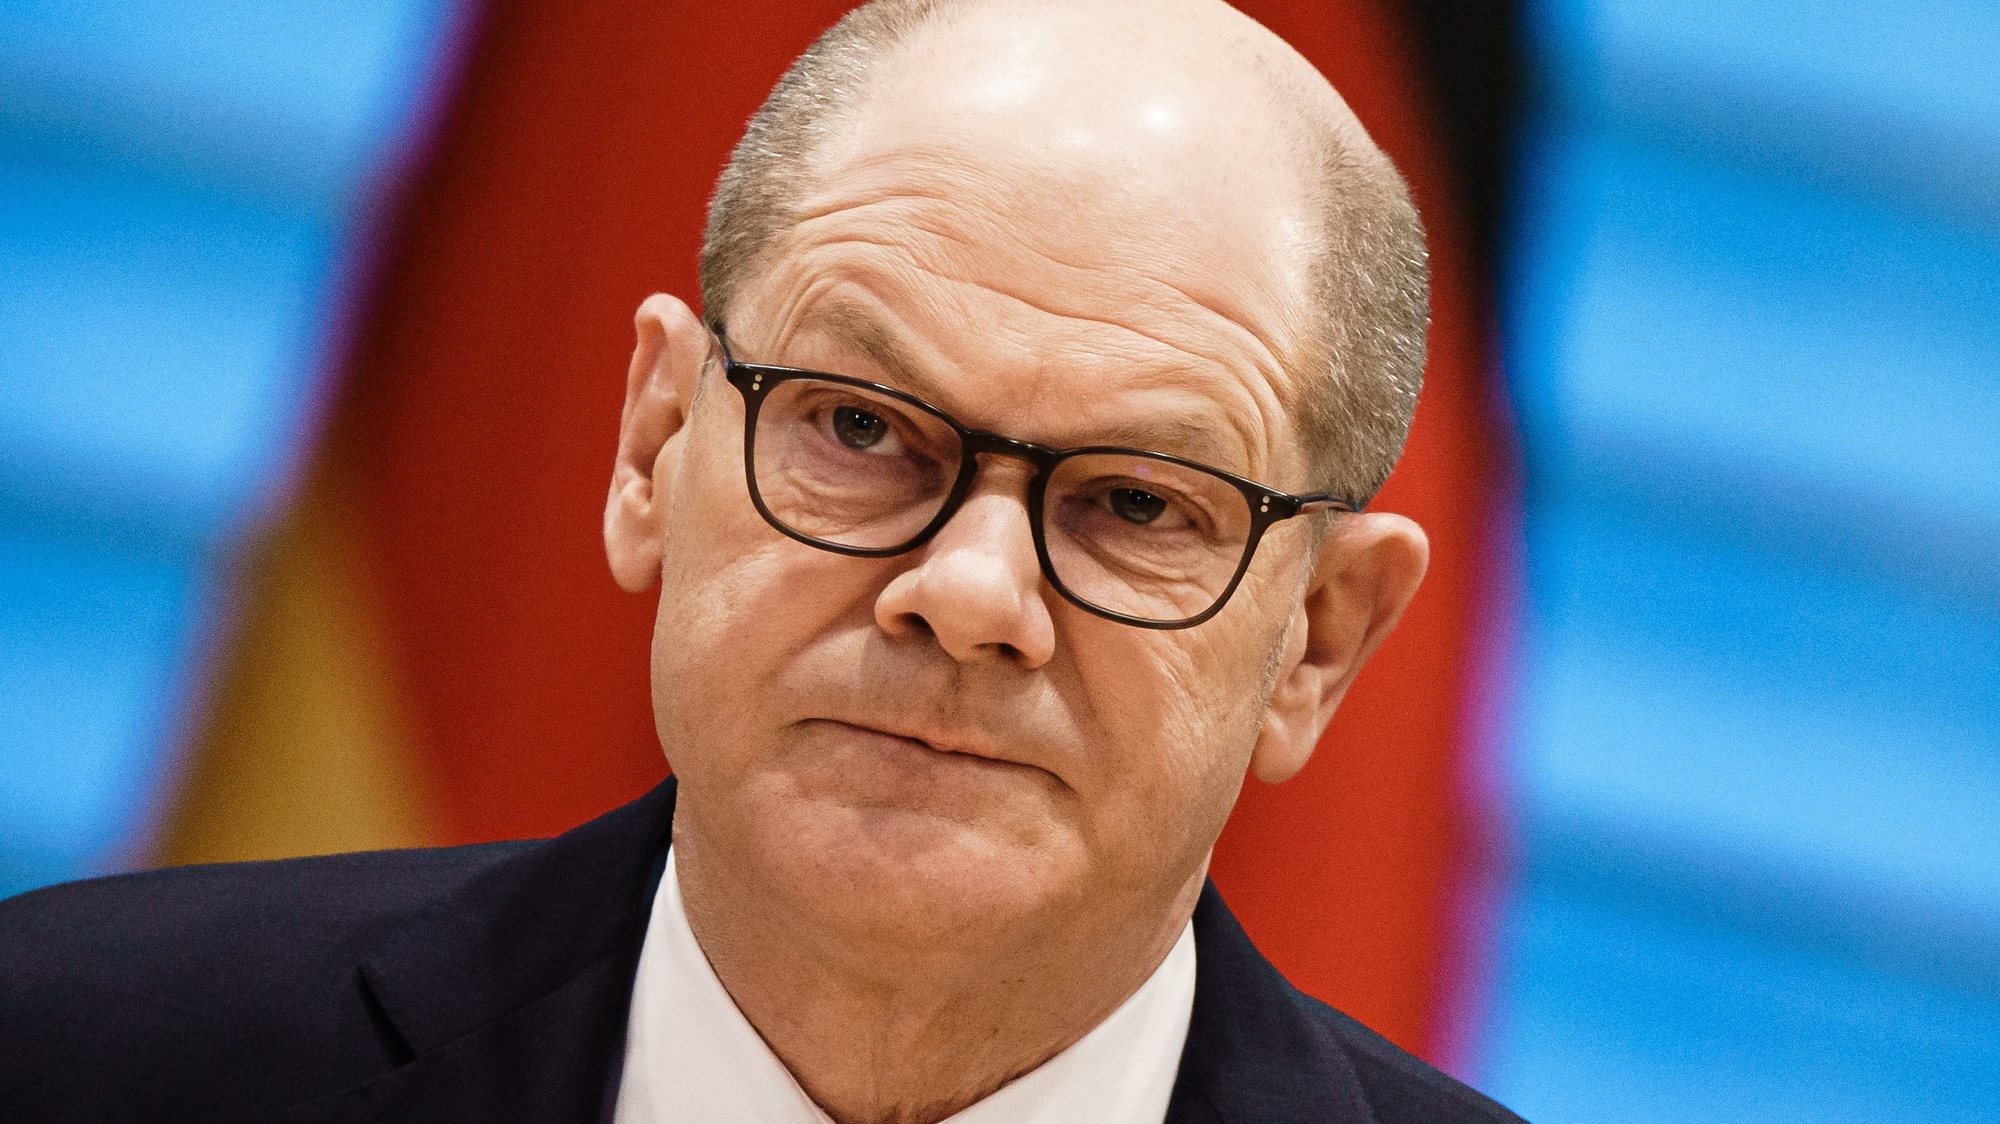 epa09807517 German Chancellor Olaf Scholz, wearing glasses, looks on at the beginning of a security cabinet meeting in Berlin, Germany, 07 March 2022.  EPA/CLEMENS BILAN / POOL